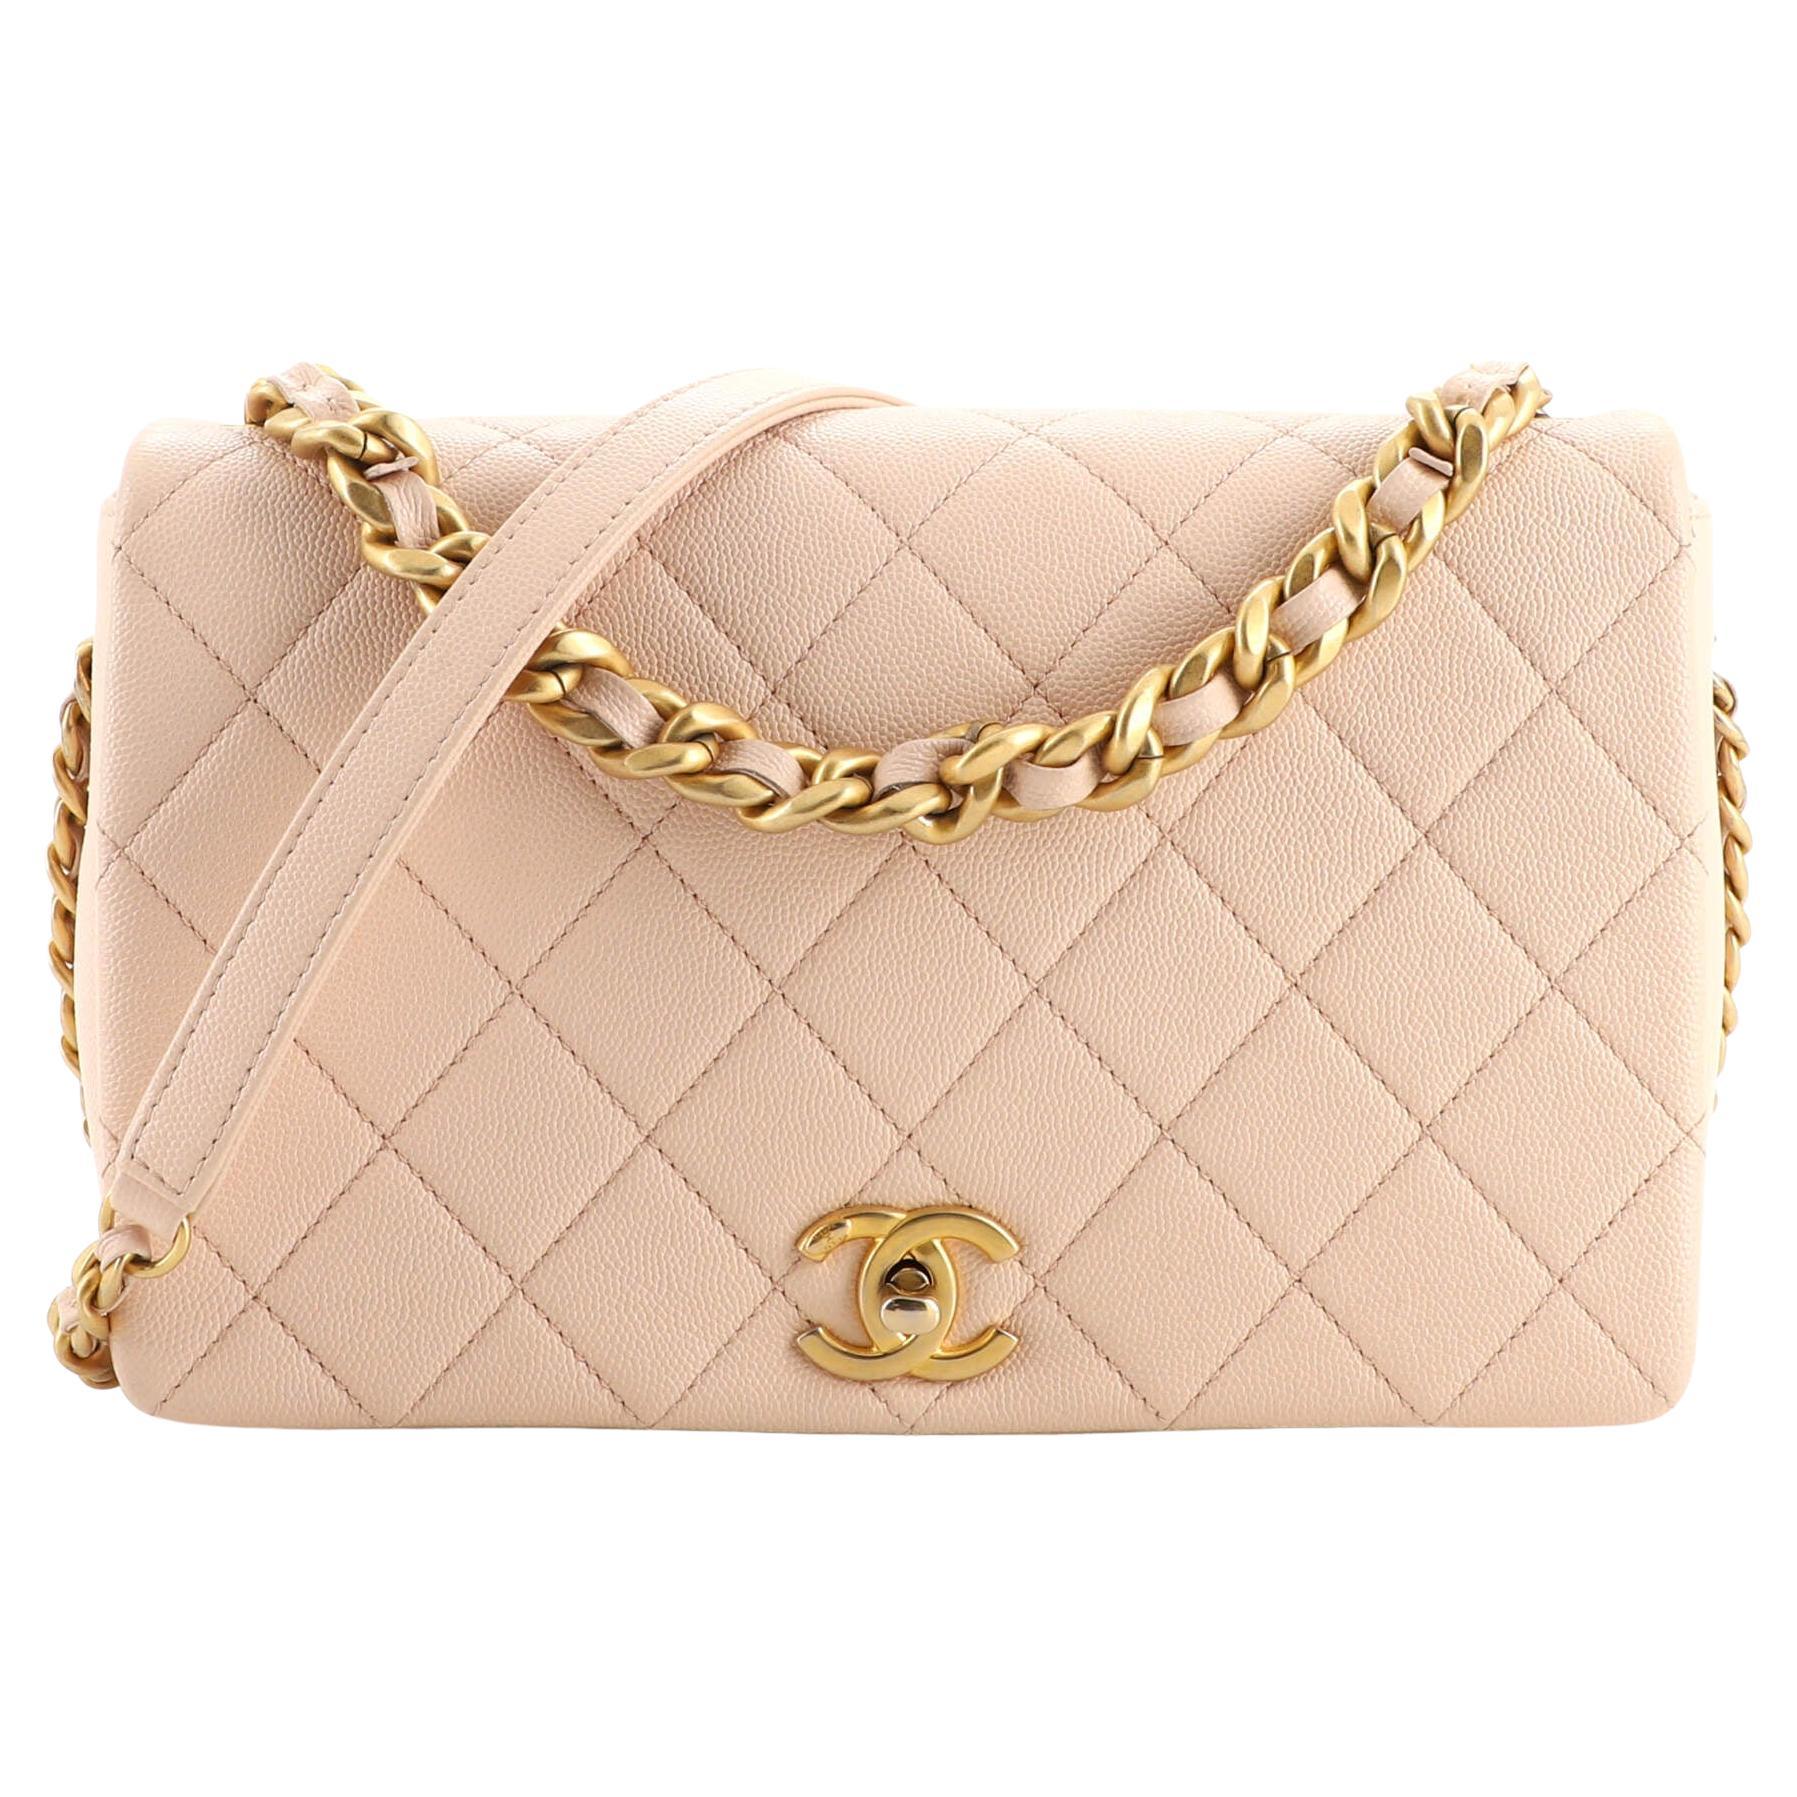 Chanel Fashion Therapy Bag - For Sale on 1stDibs